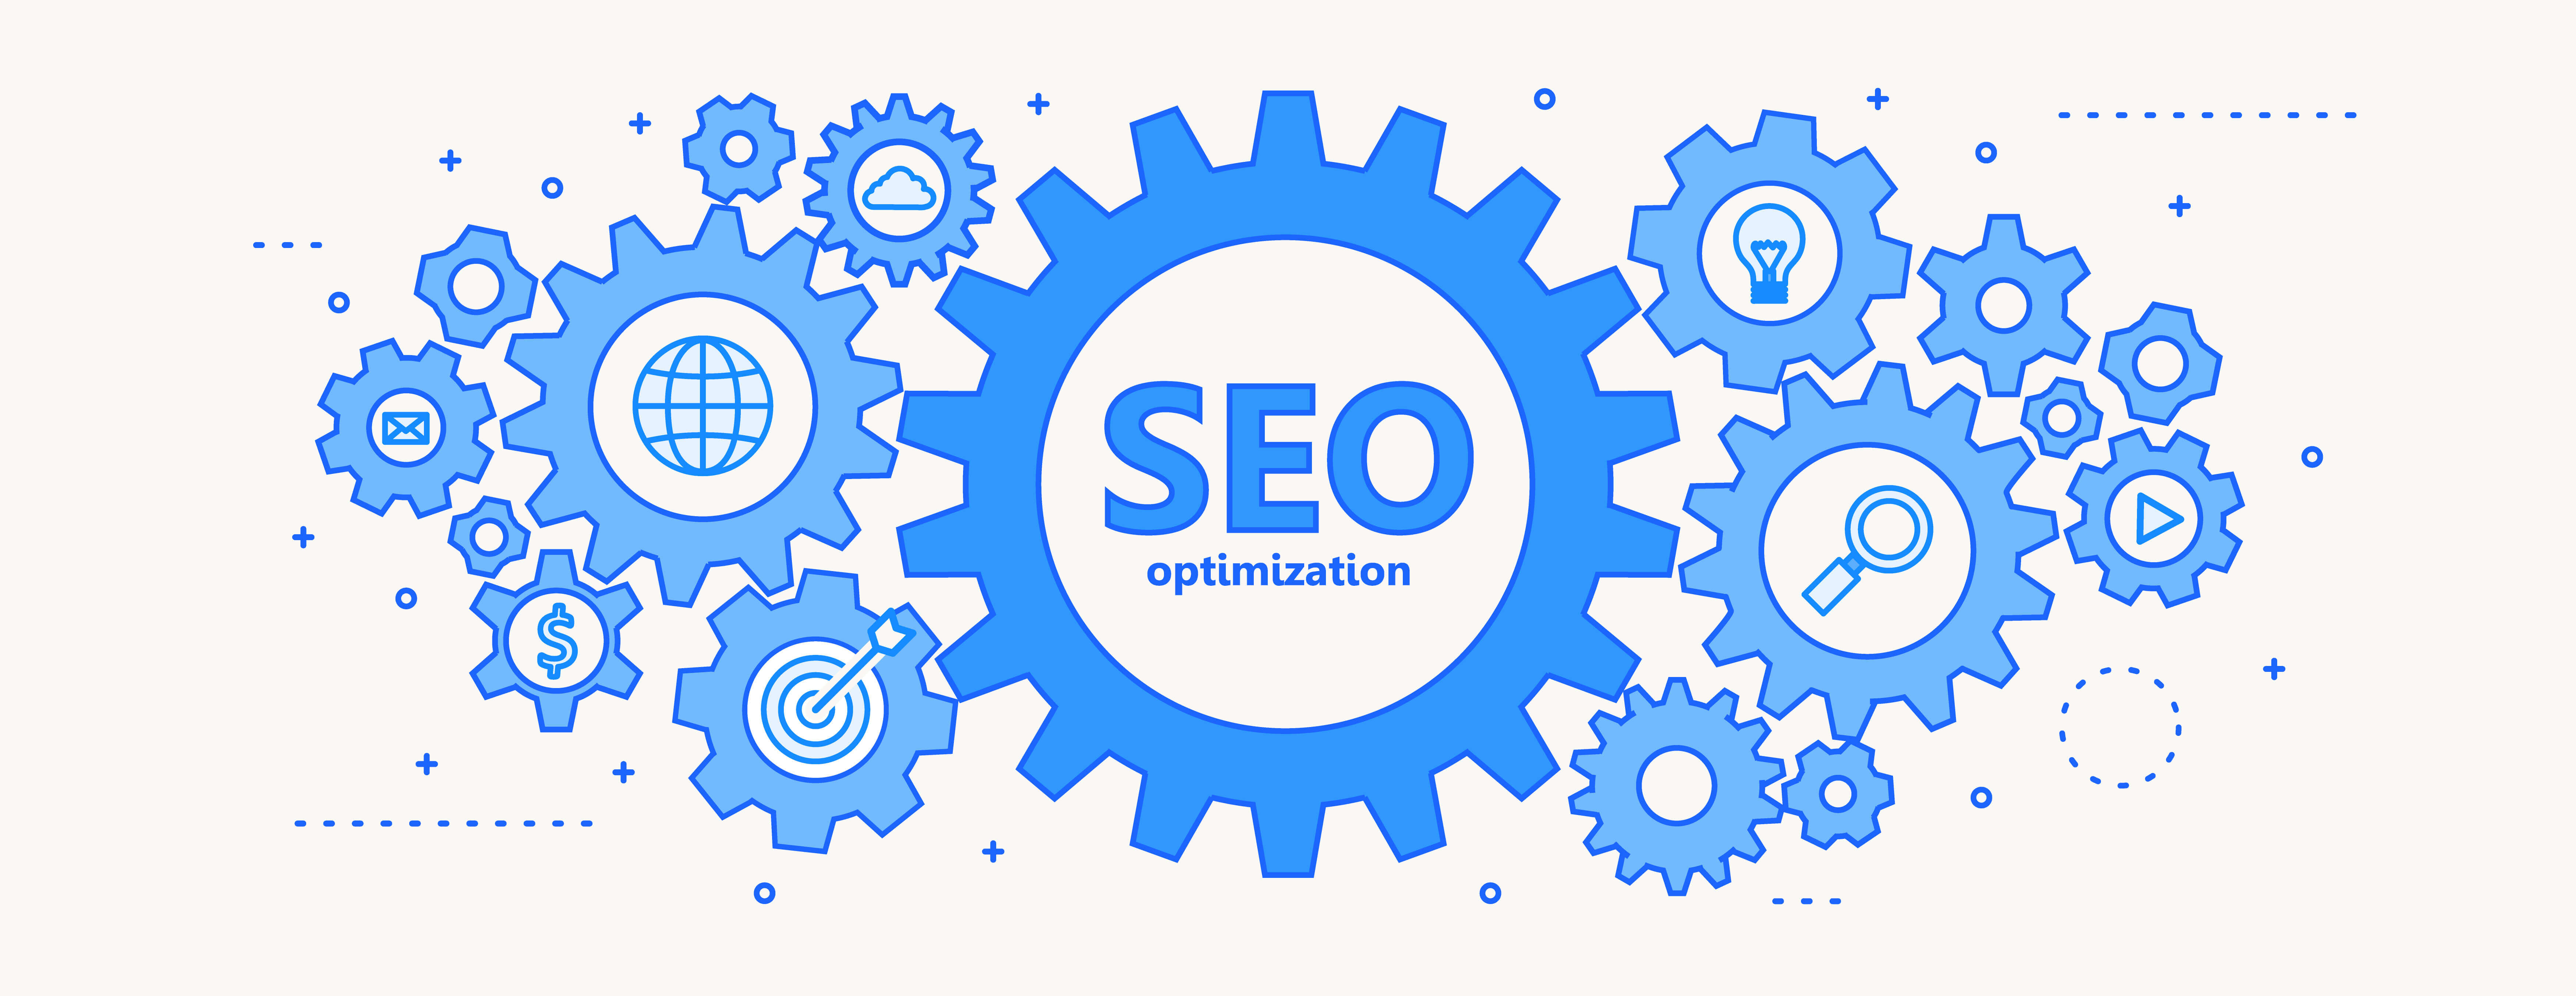 While having a website is an excellent way of promoting your business it's no secret that to get more customers, you need to expand your reach on search engines through SEO.